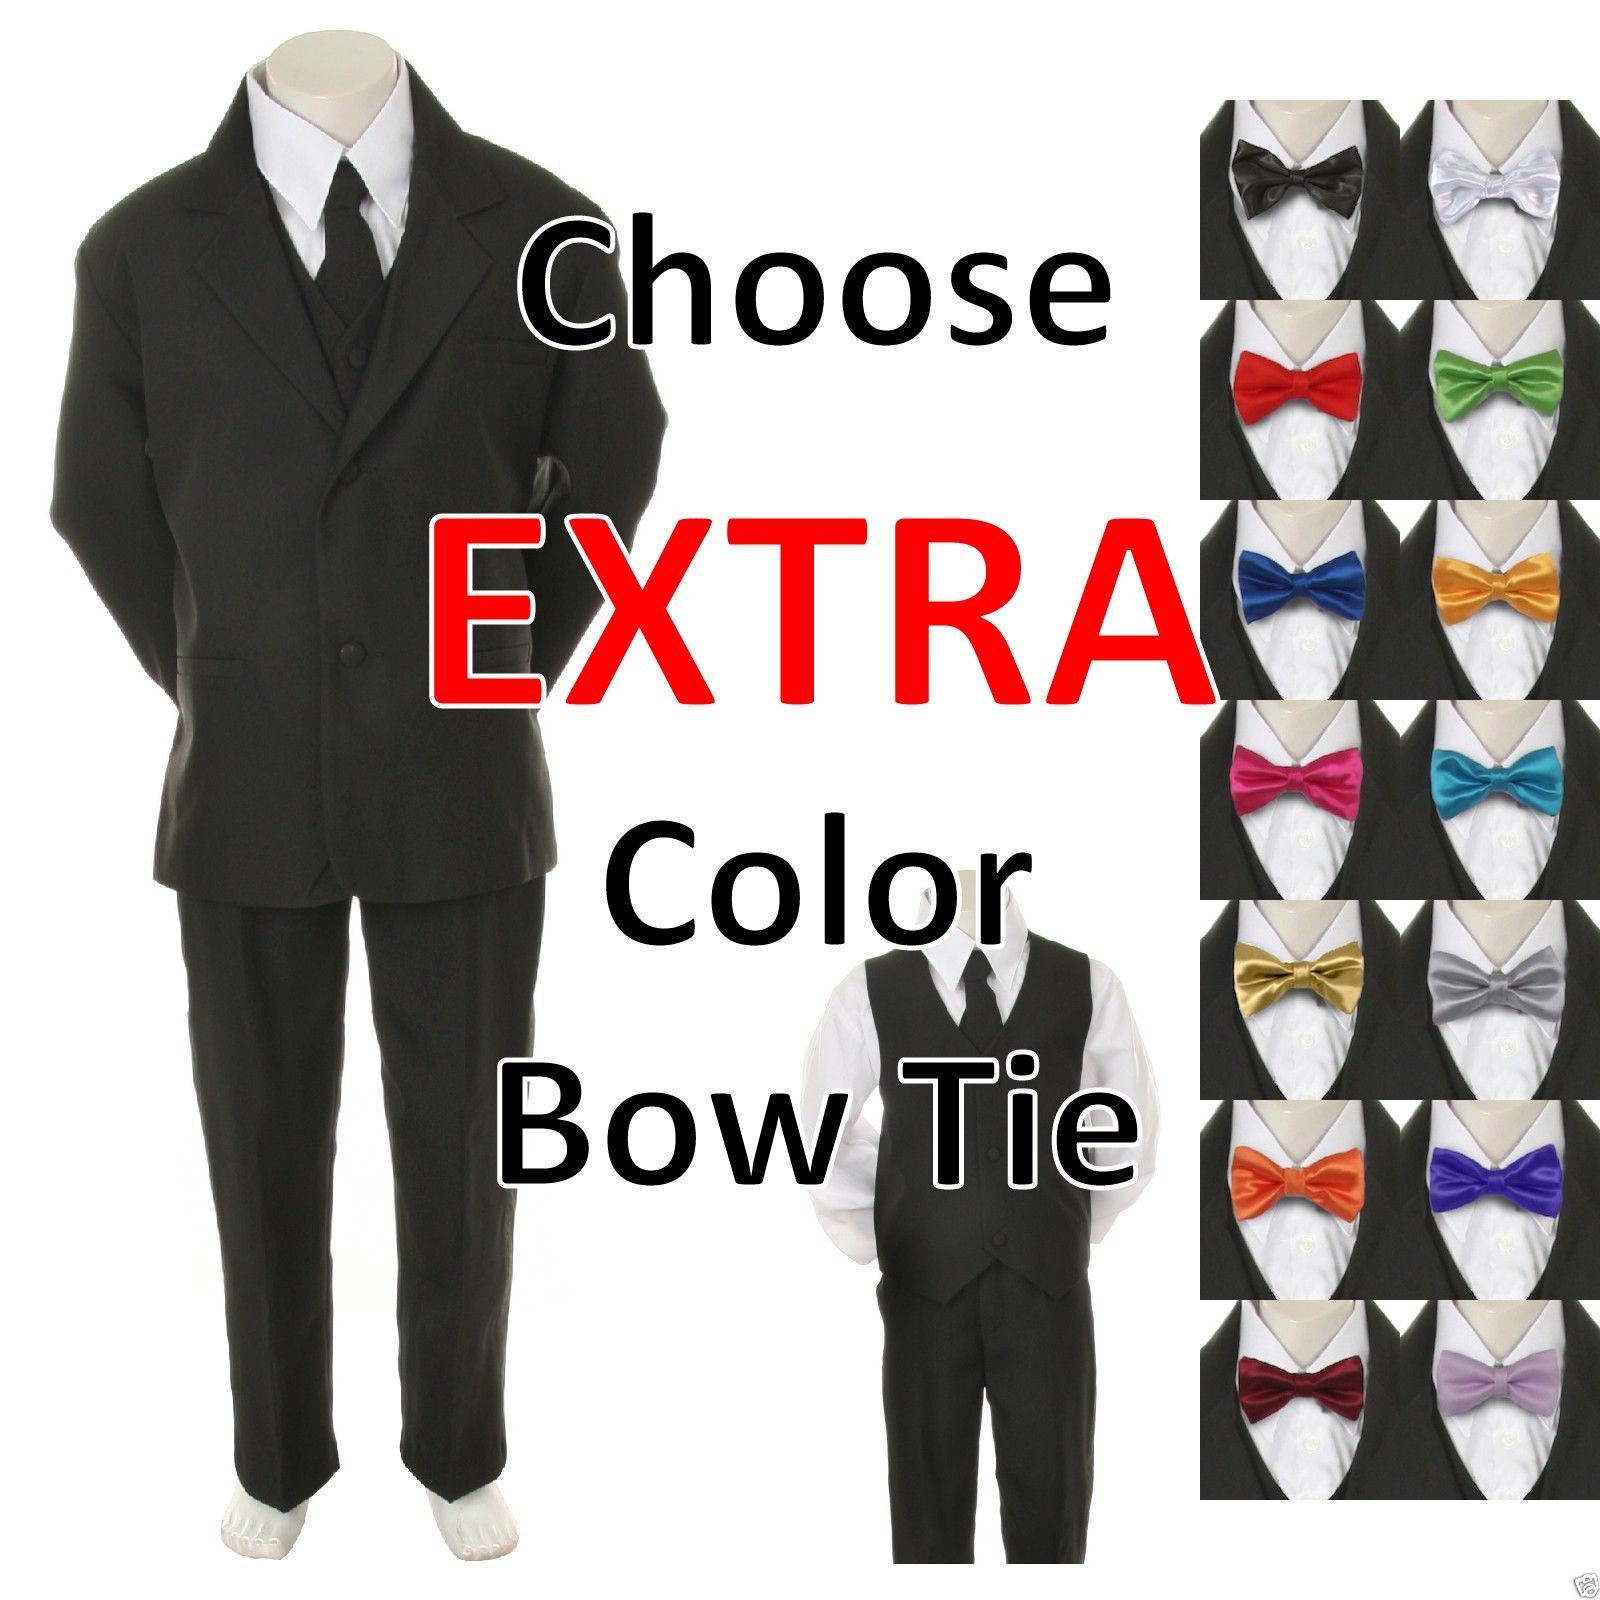 6pc Color Bow Tie + New Baby Toddler Boy Black Wedding Suit Tuxedo S-20 New Teen - image 1 of 3